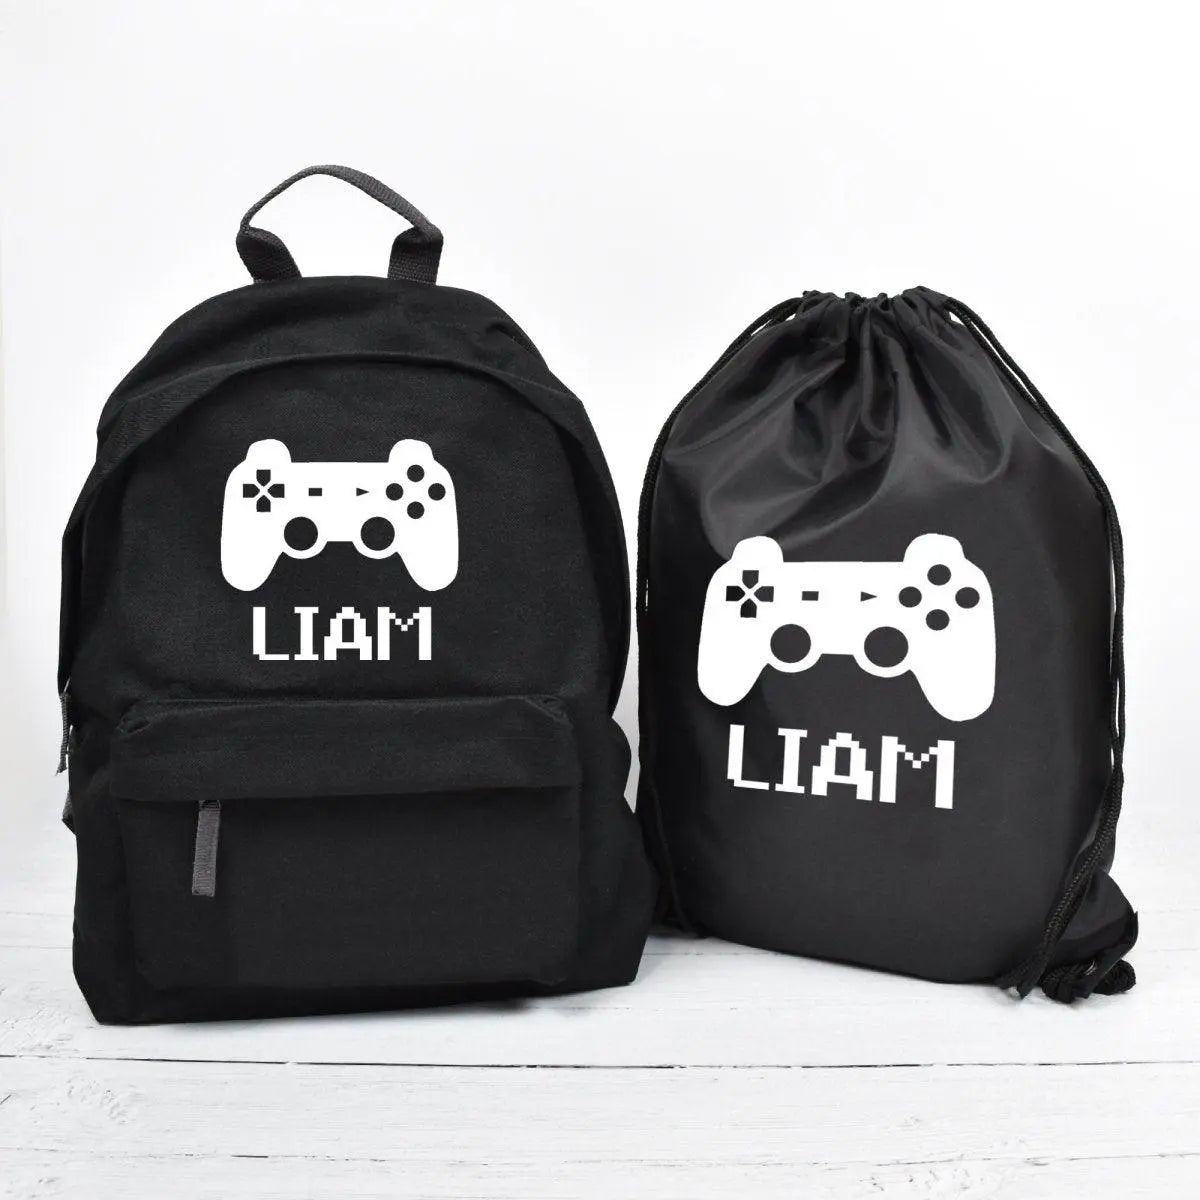 Personalised Gaming Backpack, Gamer School Bag, Kids Gamer Rucksack, Boys School Backpack, Kids Children Student Backpack, Back To School - Amy Lucy